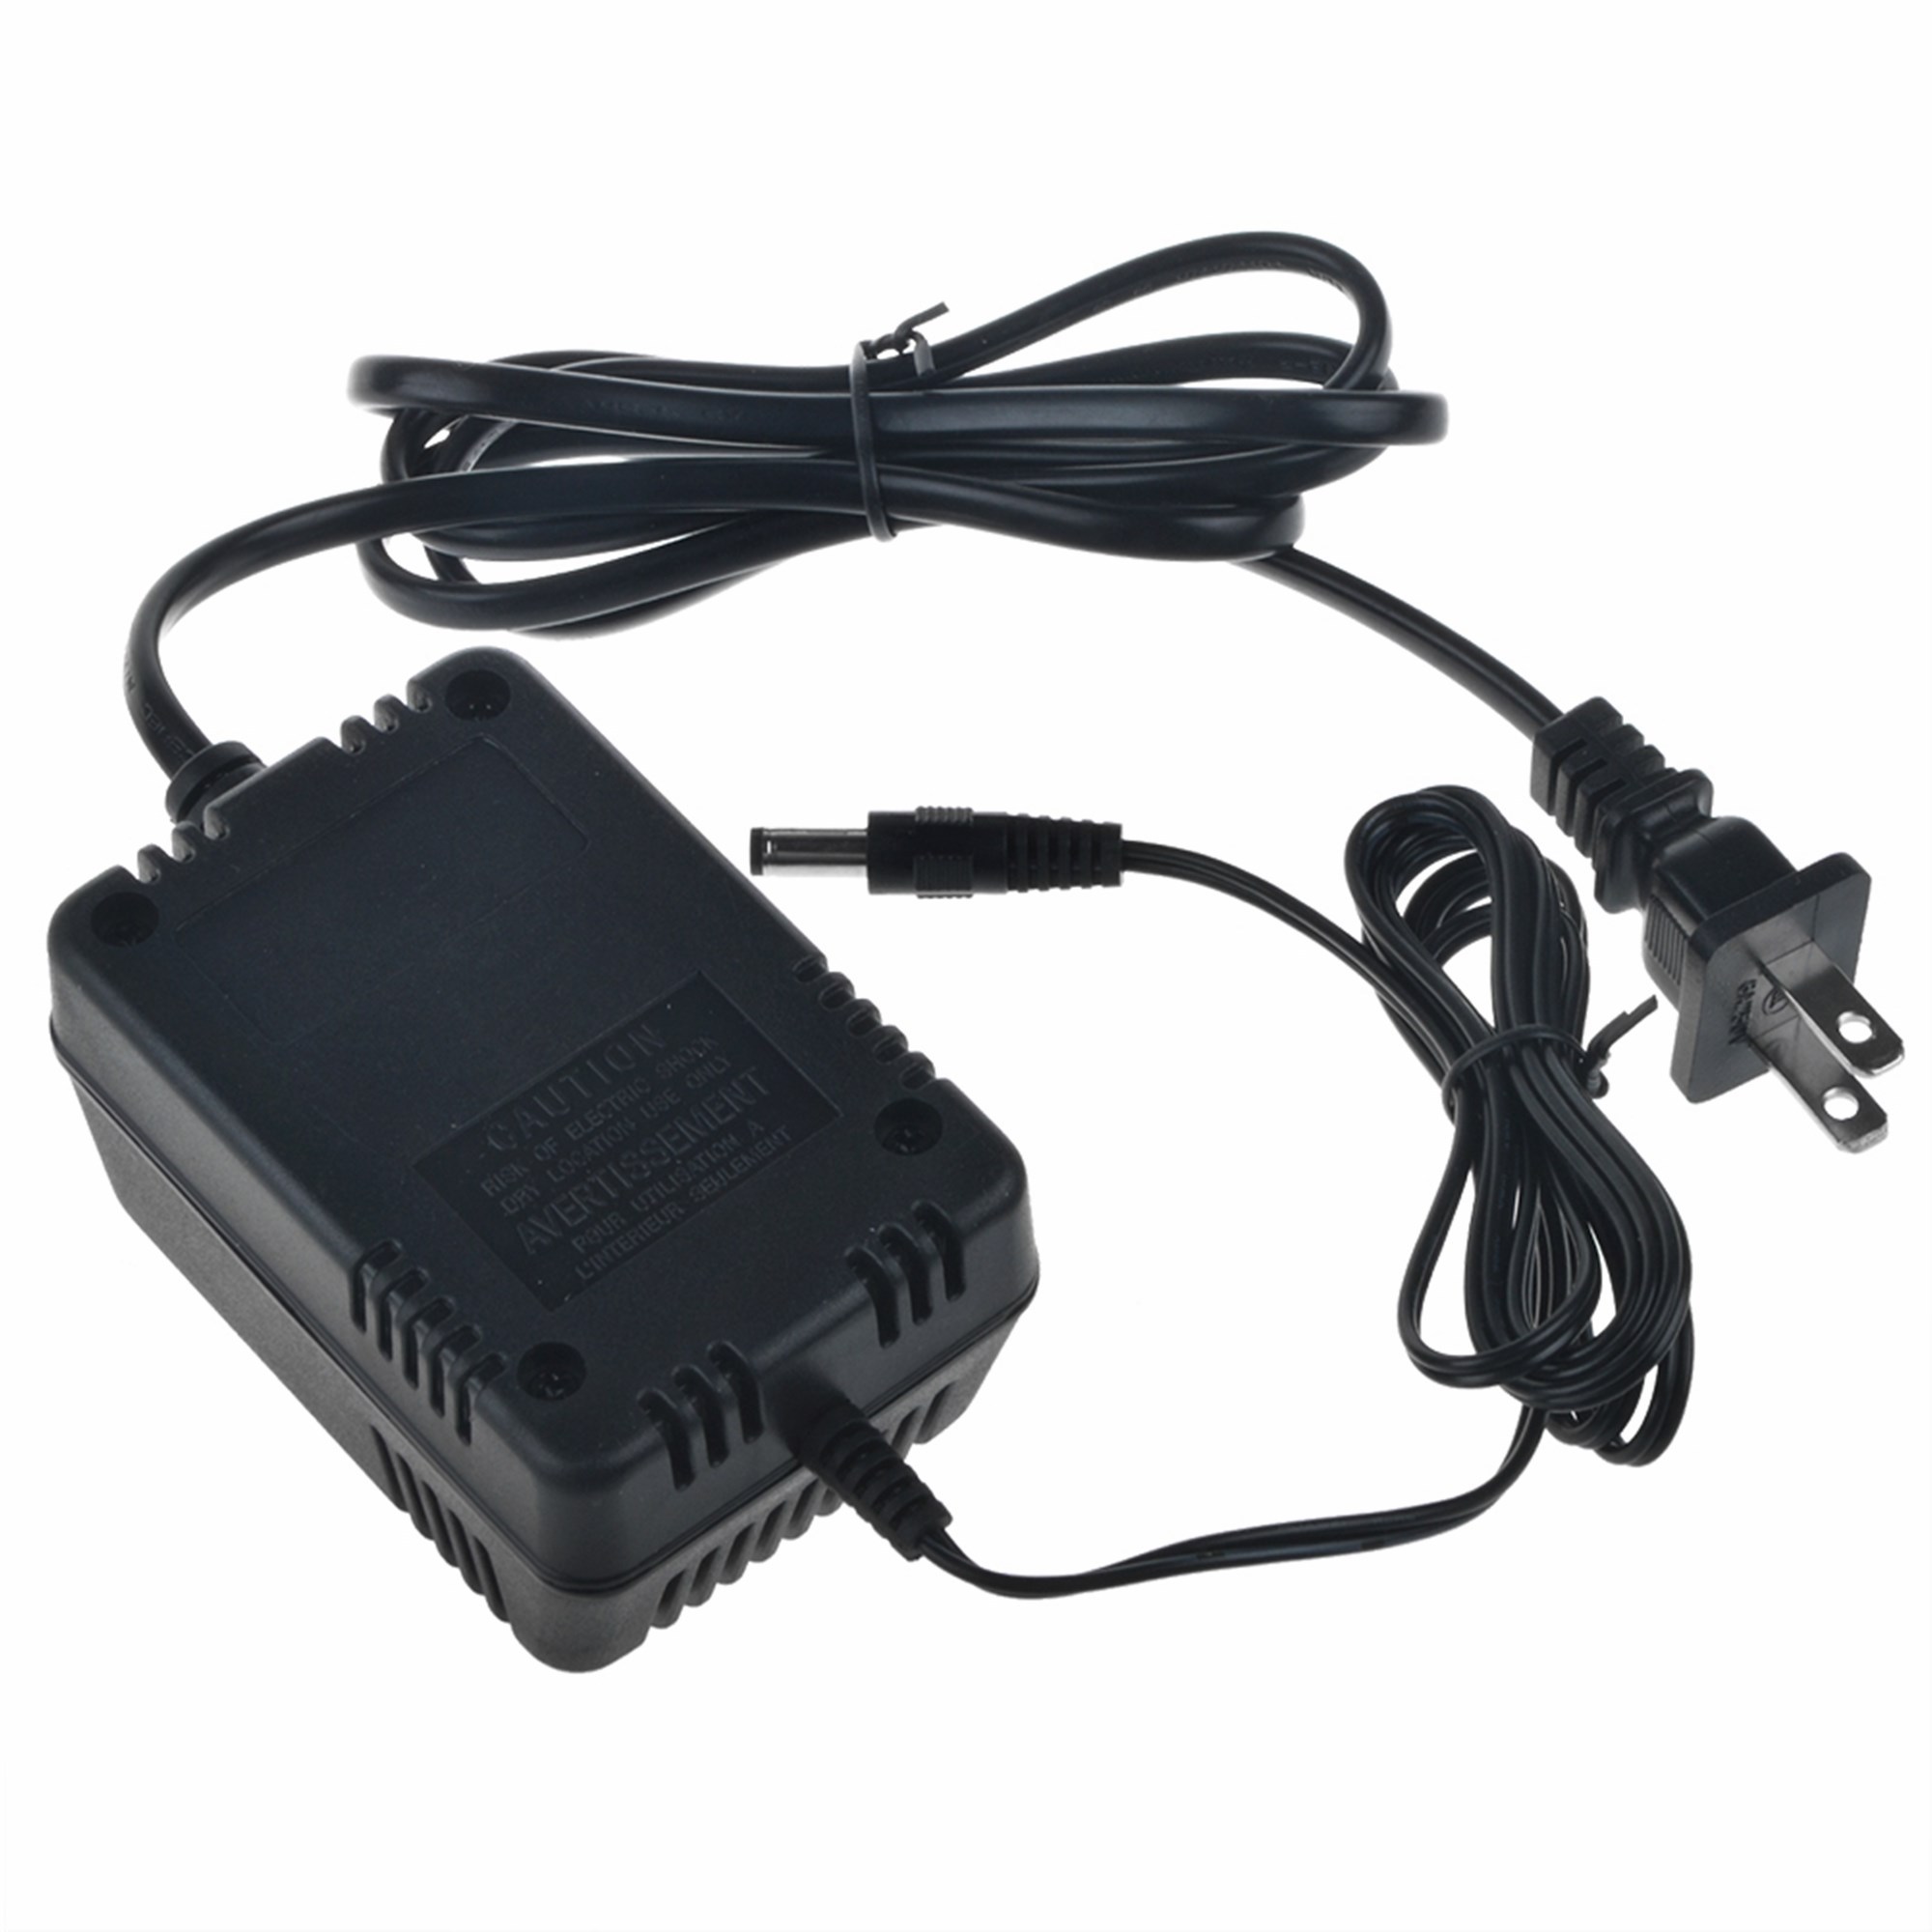 FITE ON Compatible AC - AC Adapter Replacement for Vestax P/N: 1806-3852+1  1806-3852-1 180638521 ITE Power Cord